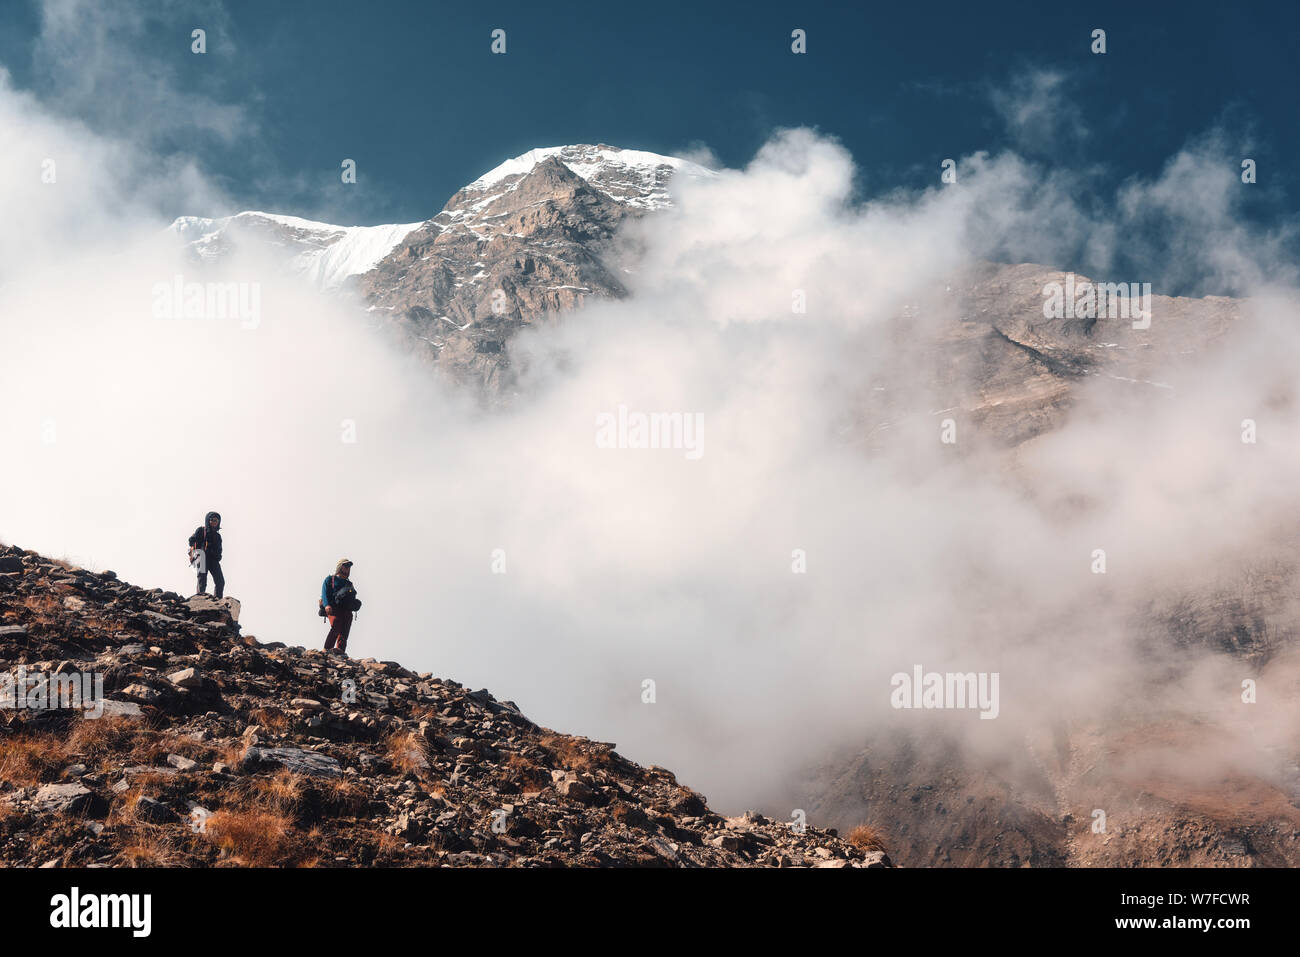 Standing people on the mountain trail in low clouds Stock Photo